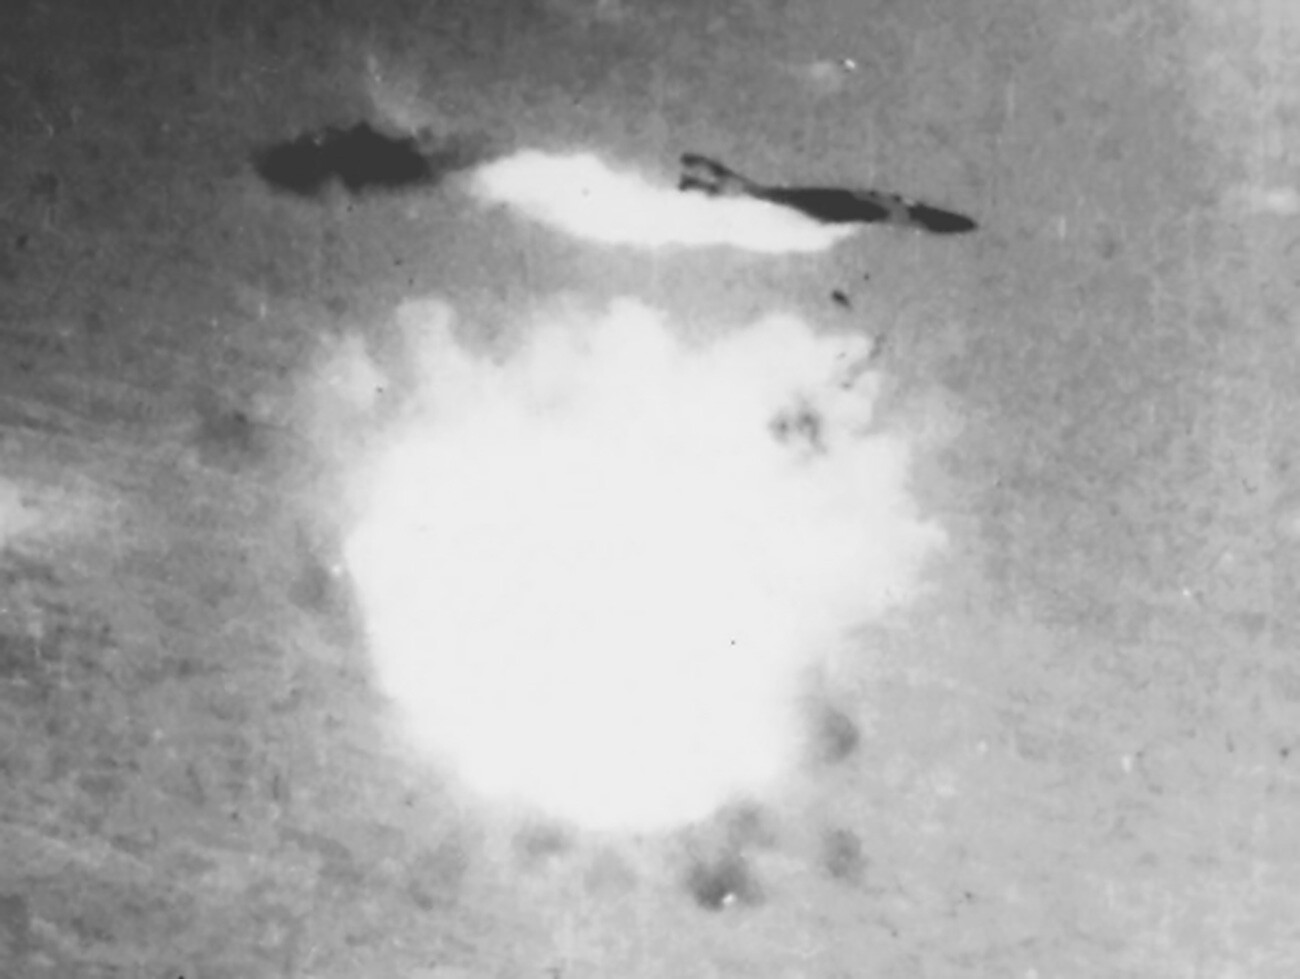 F-4 fighter-bomber destroyed by a Soviet missile.